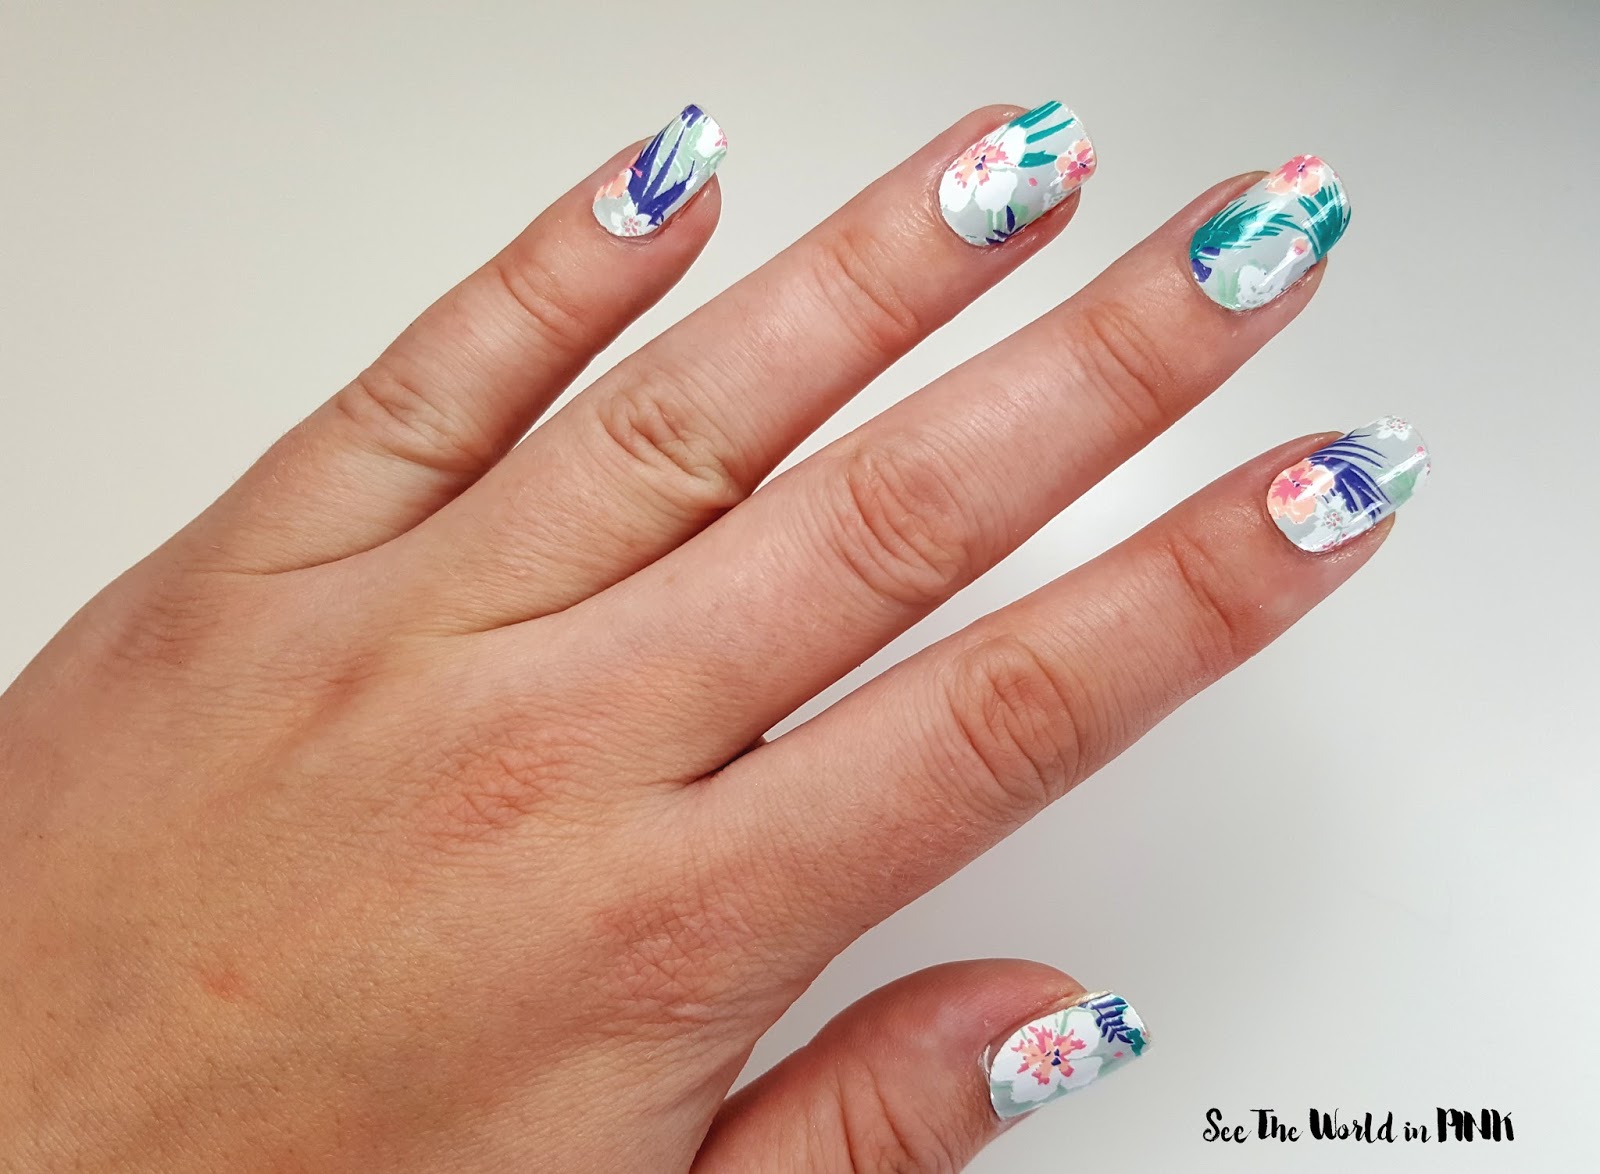 Manicure Tuesday - Scratch and NinaNailedIt Tropical Floral Wraps! 